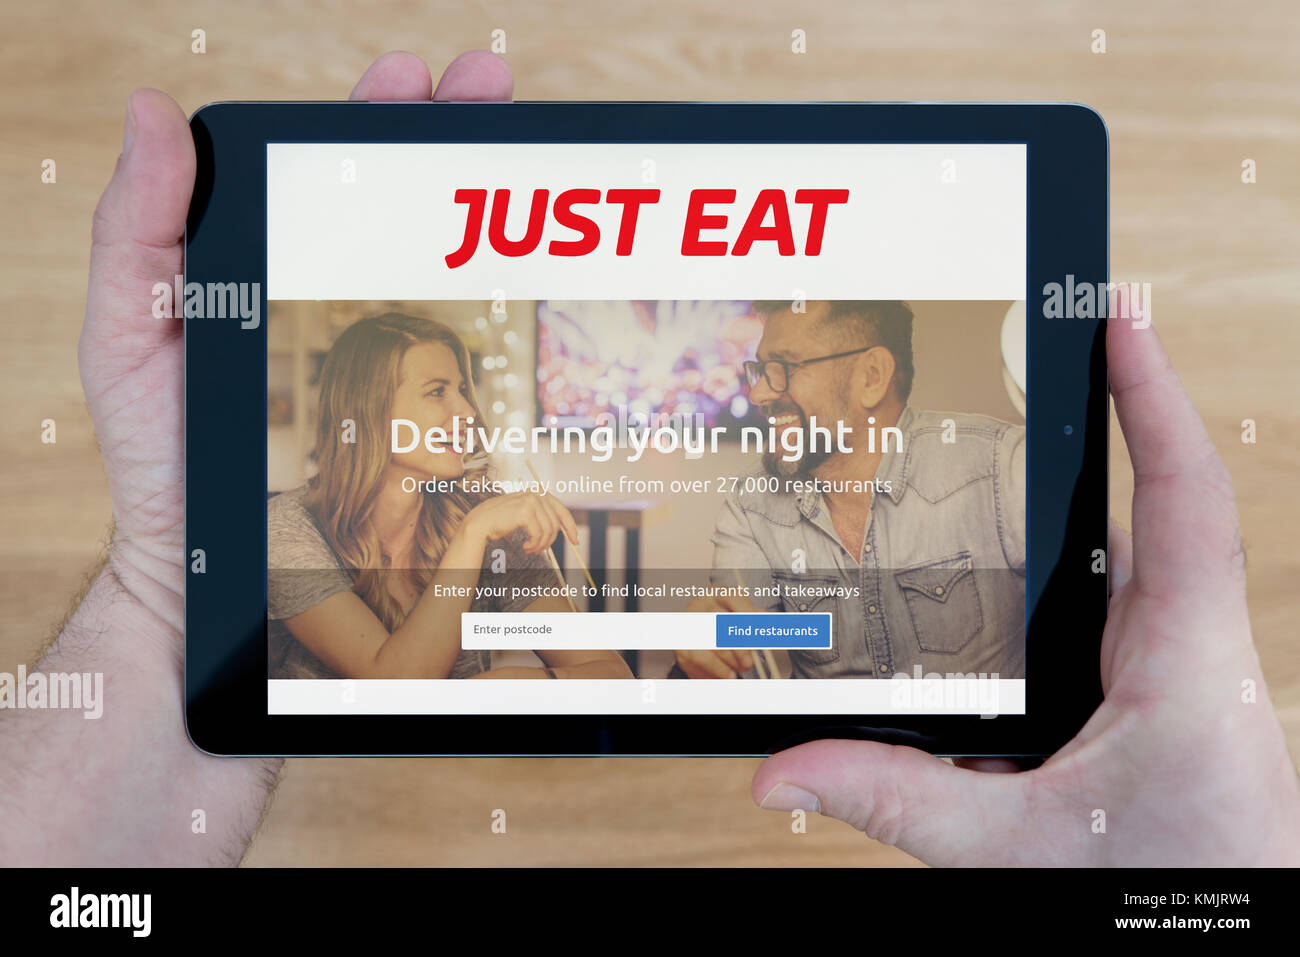 A man looks at the Just Eat website on his iPad tablet device, shot against a wooden table top background (Editorial use only) Stock Photo